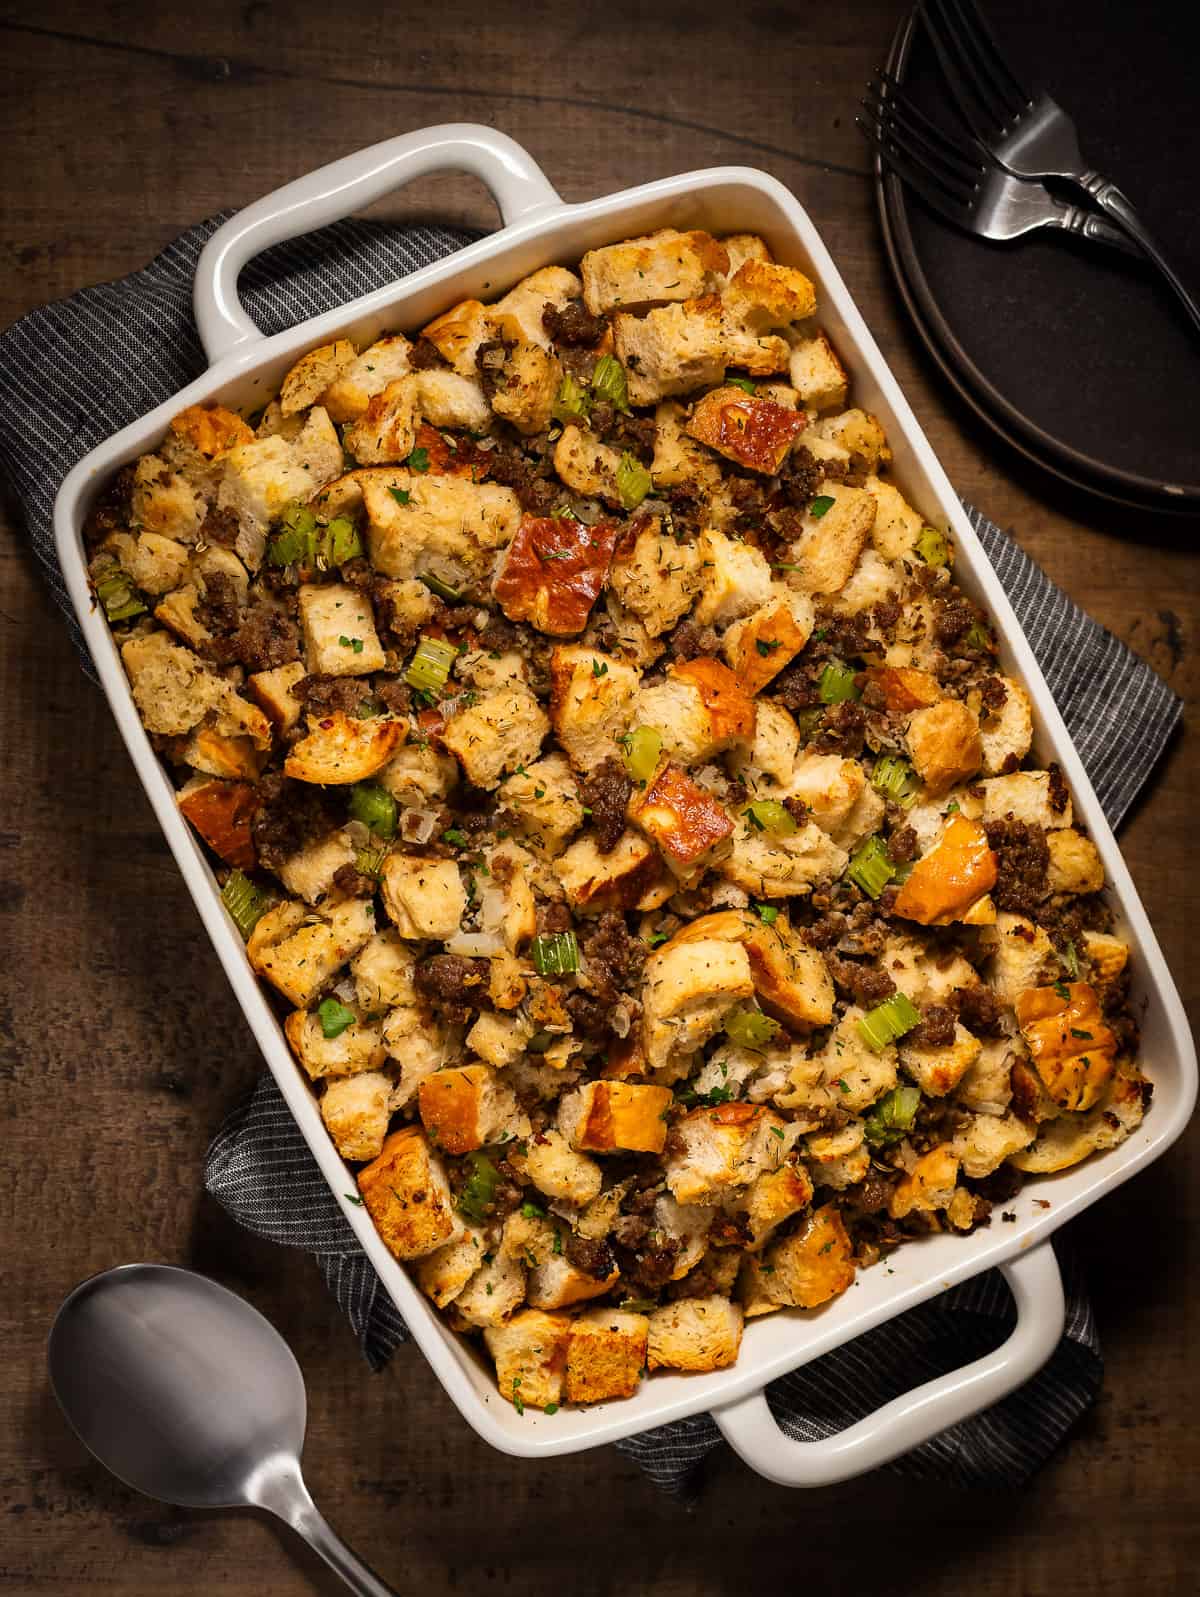 Italian Sausage Stuffing with Parmesan - Sip and Feast